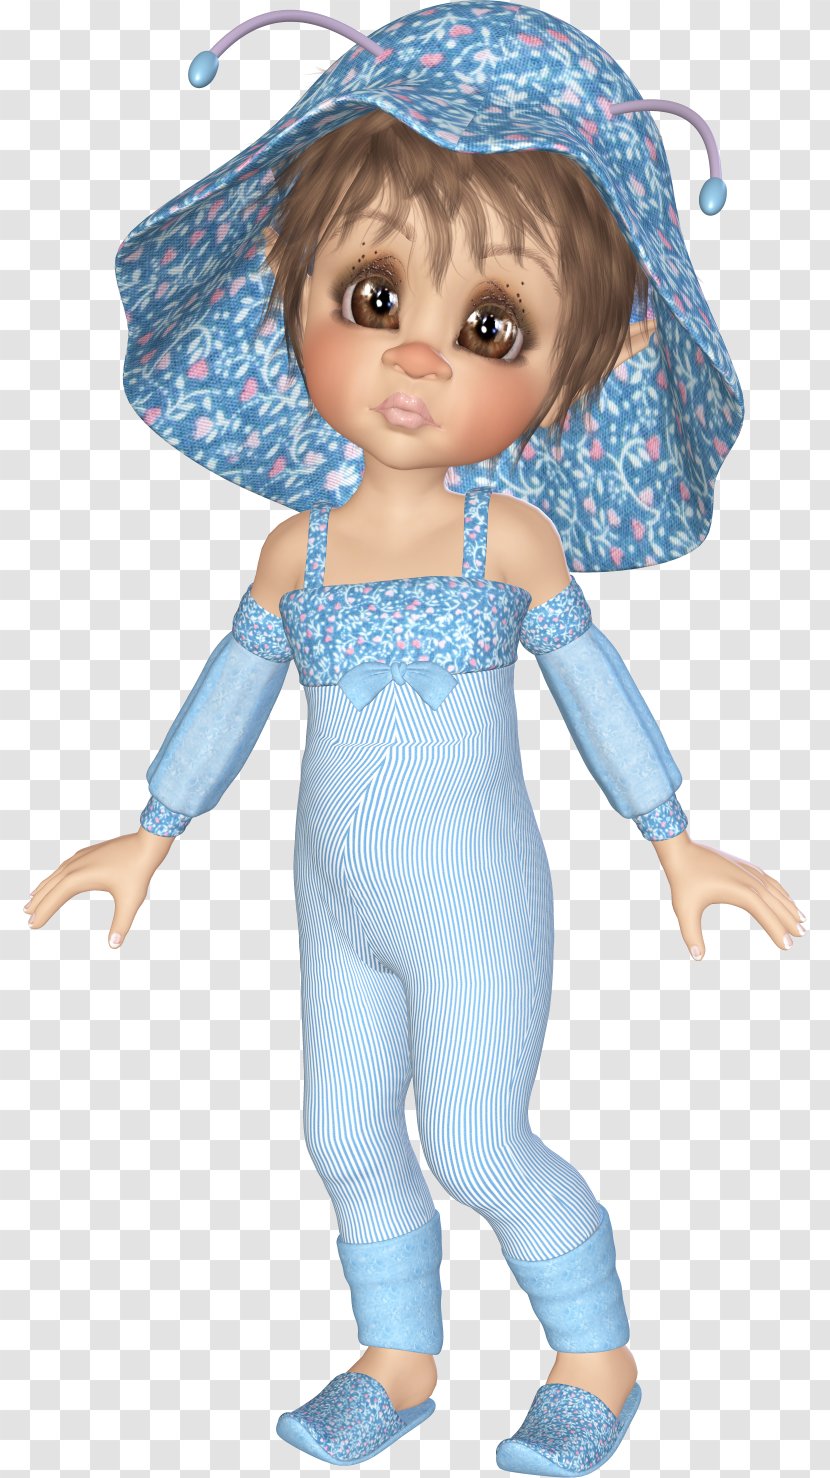 Biscuits Renderosity Character Toddler Figurine - Microsoft Azure - August 15 Transparent PNG